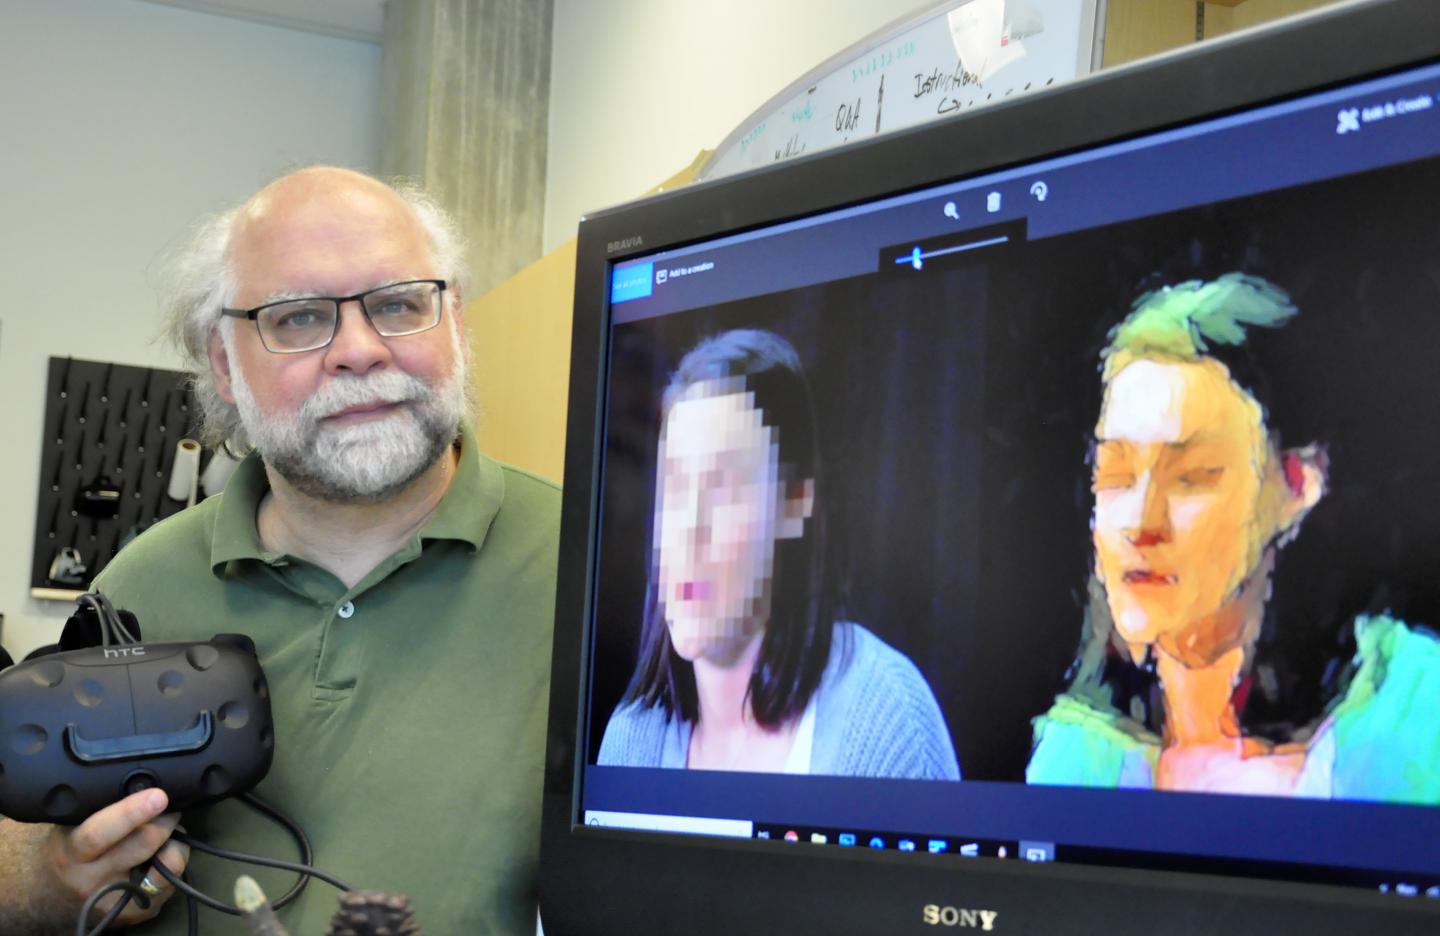 'Blurred Face' News Anonymity Gets An Artificial Intelligence Spin